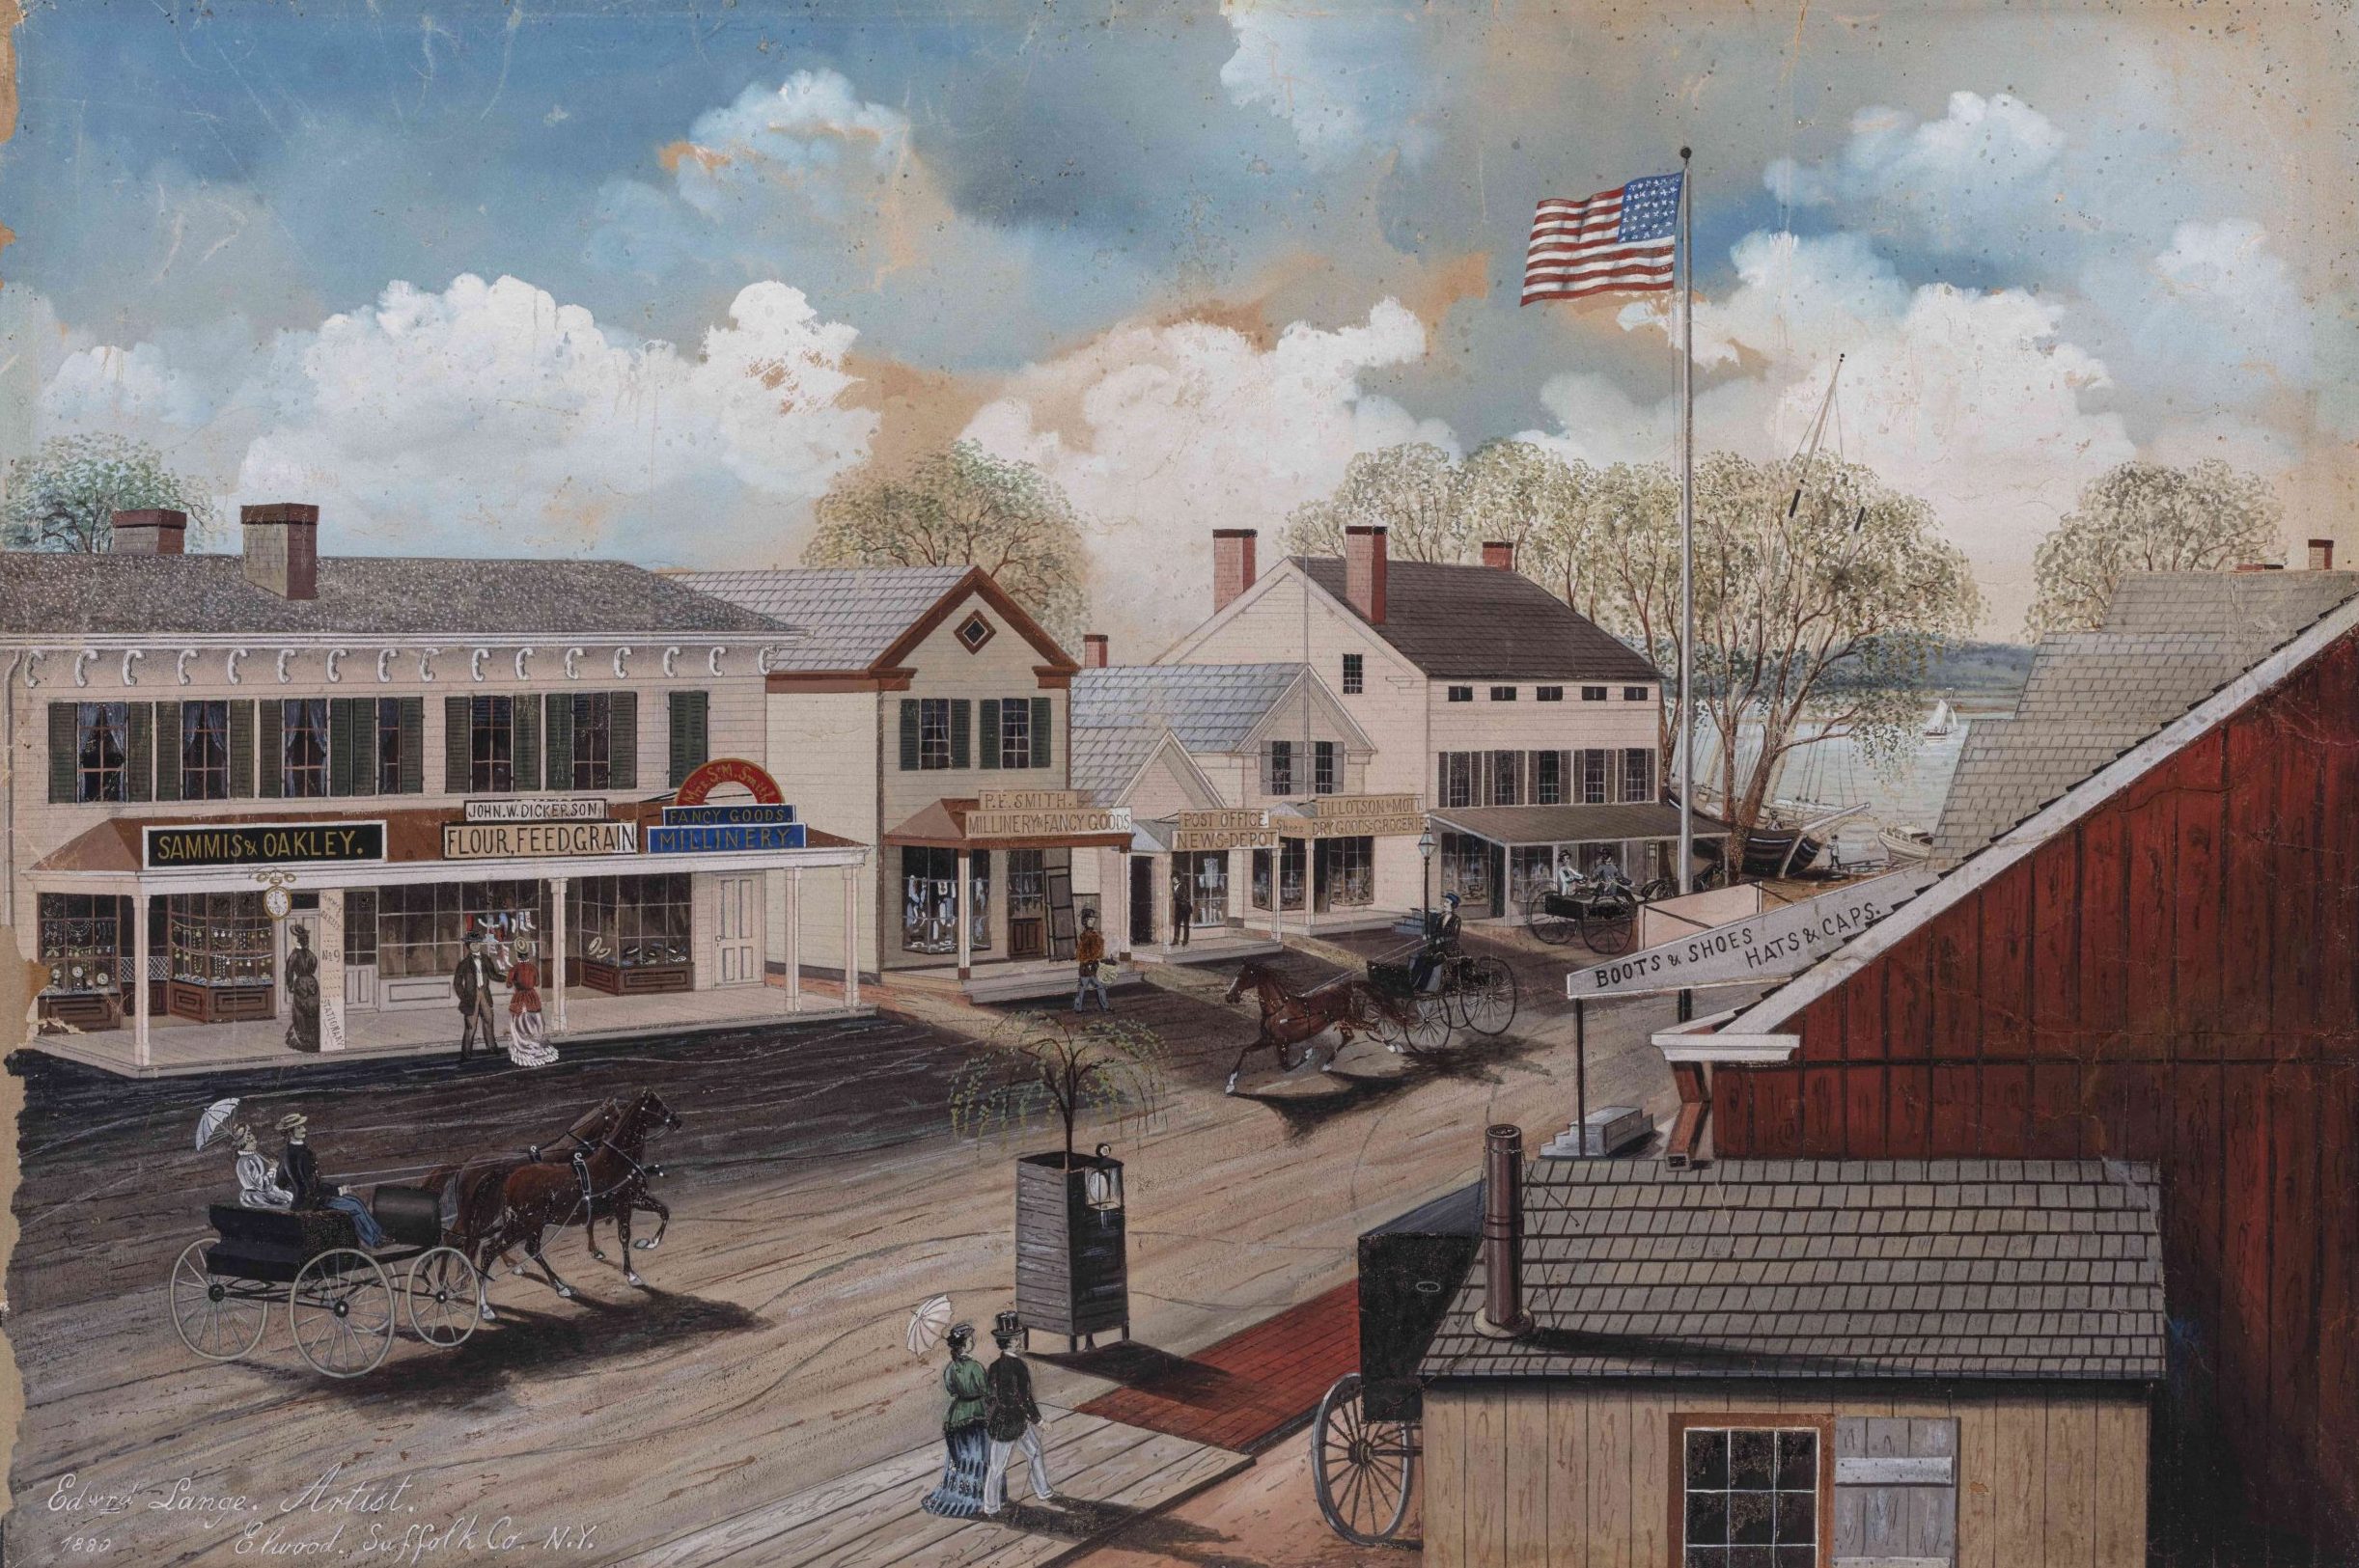 Lower-Main-Street-Northport-Collection-of-Preservation-Long-Island-2011.2-scaled-e1649344465721.jpg